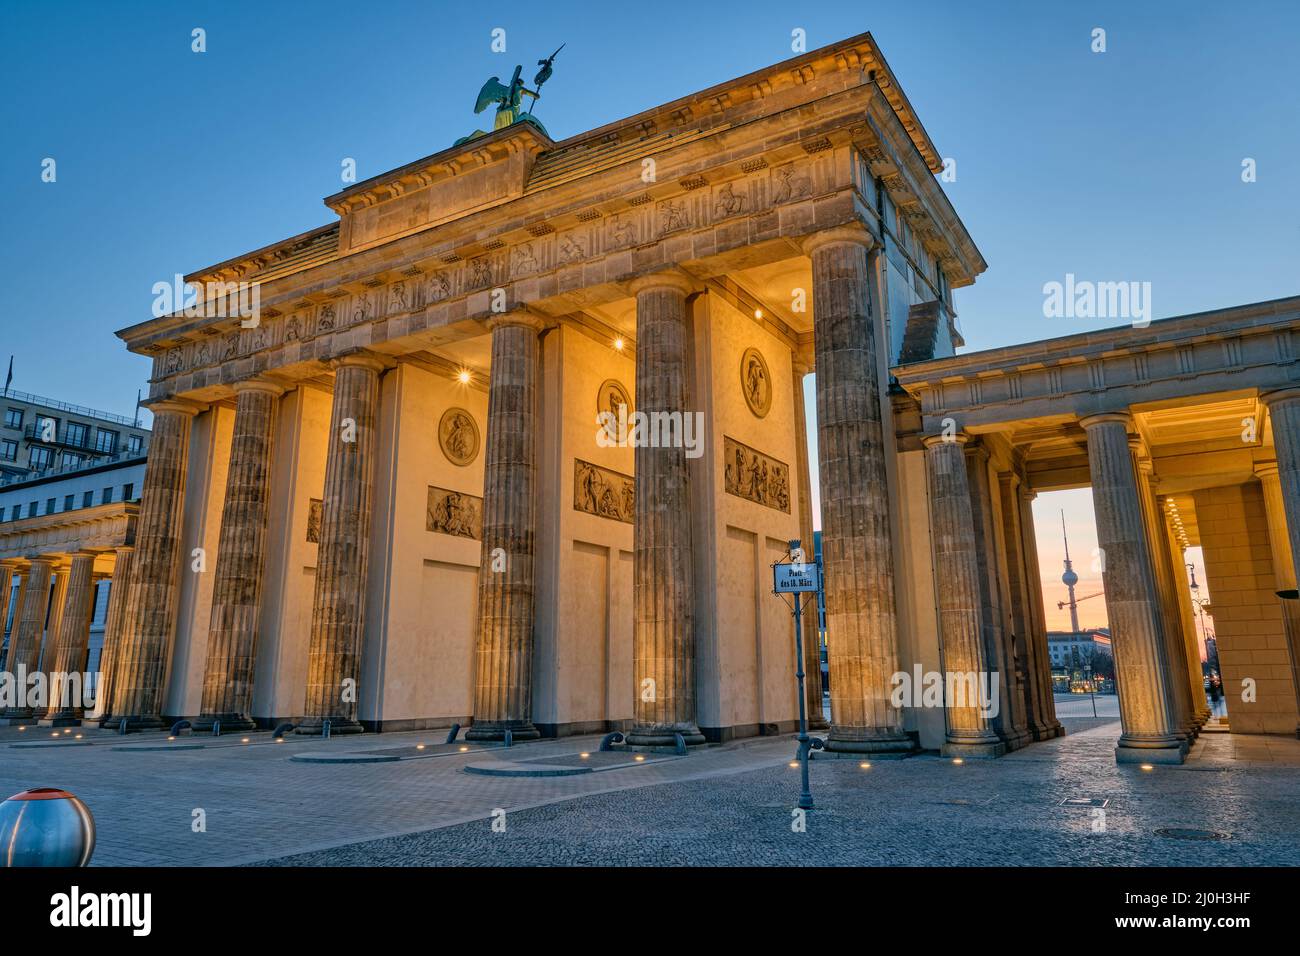 The back side of the famous Brandenburg Gate in Berlin before sunrise with a view to the Television Stock Photo